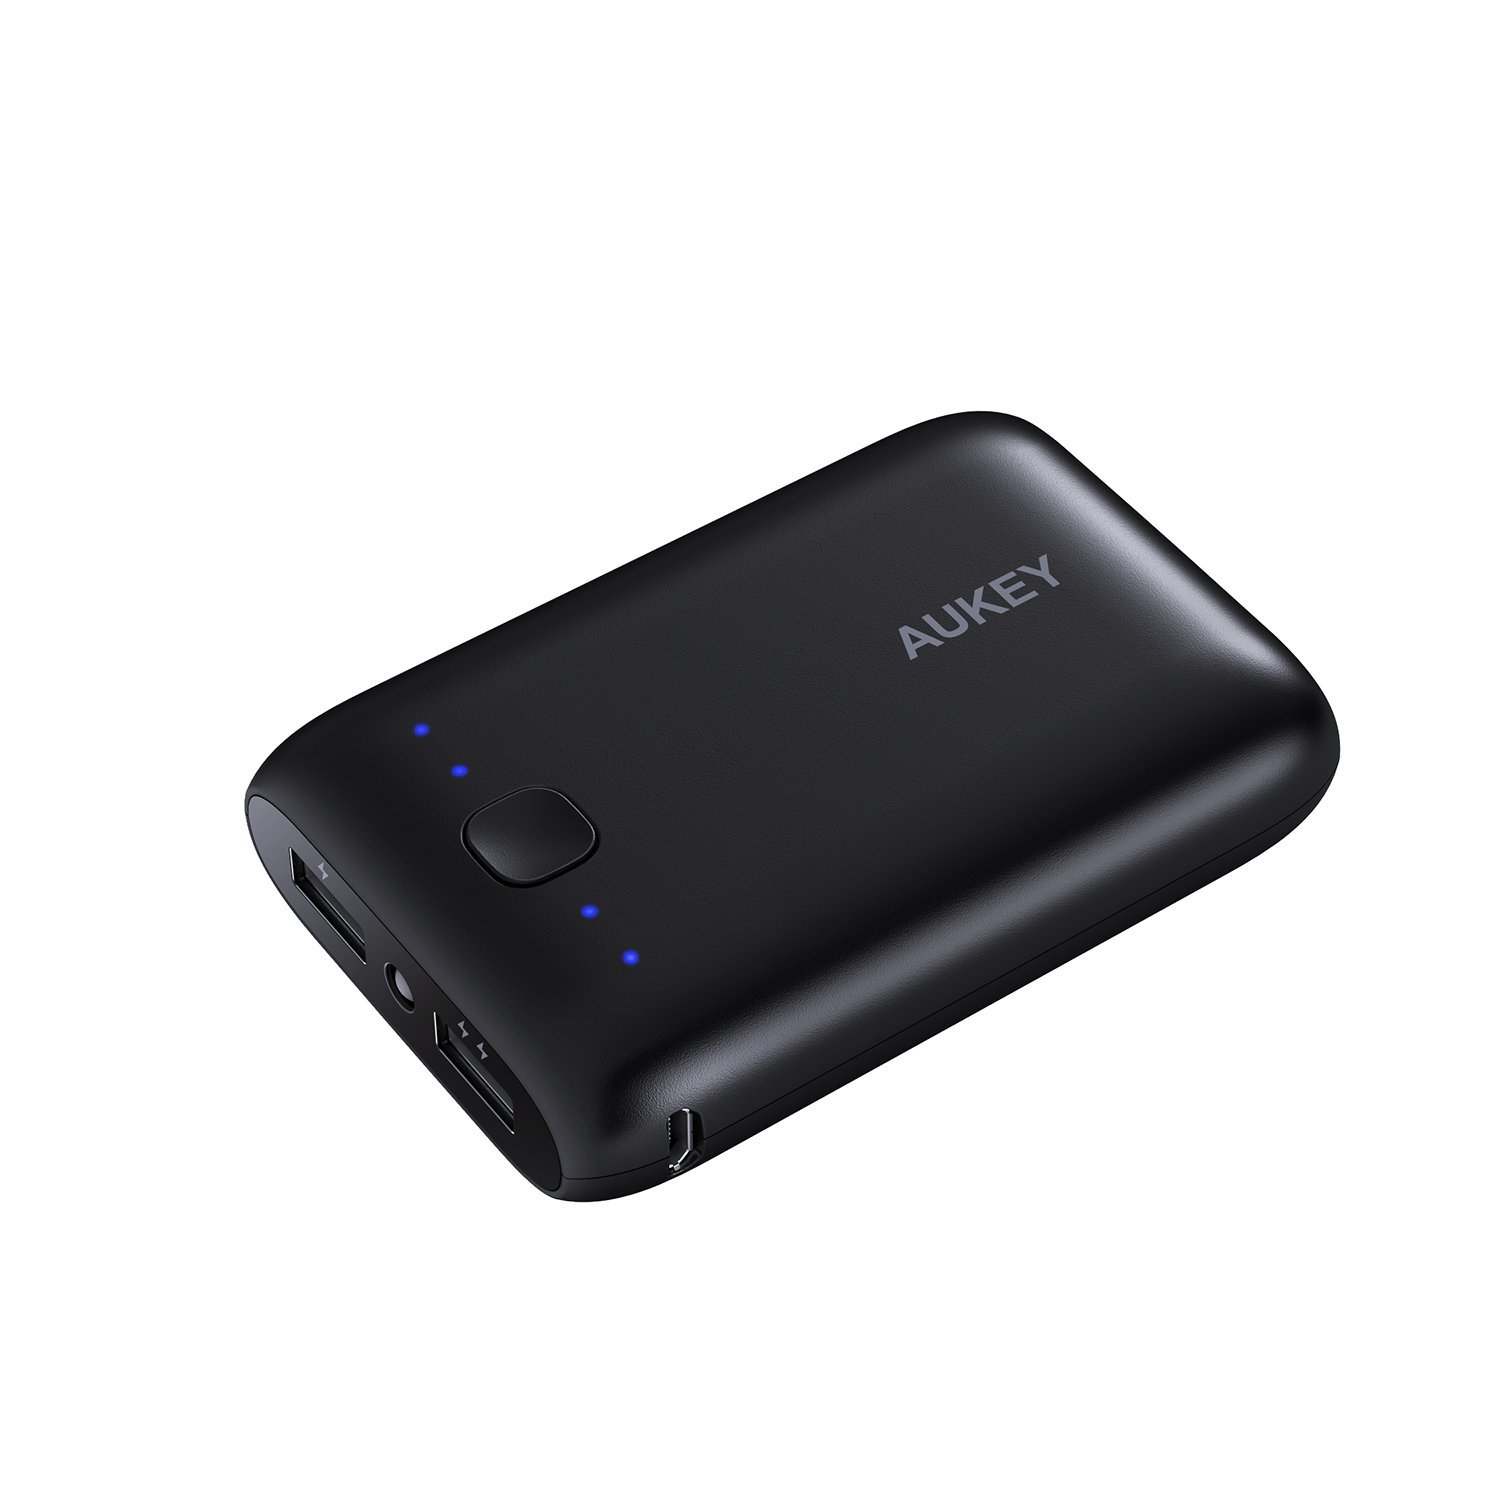 Aukey 10050mAh portable charger for $11